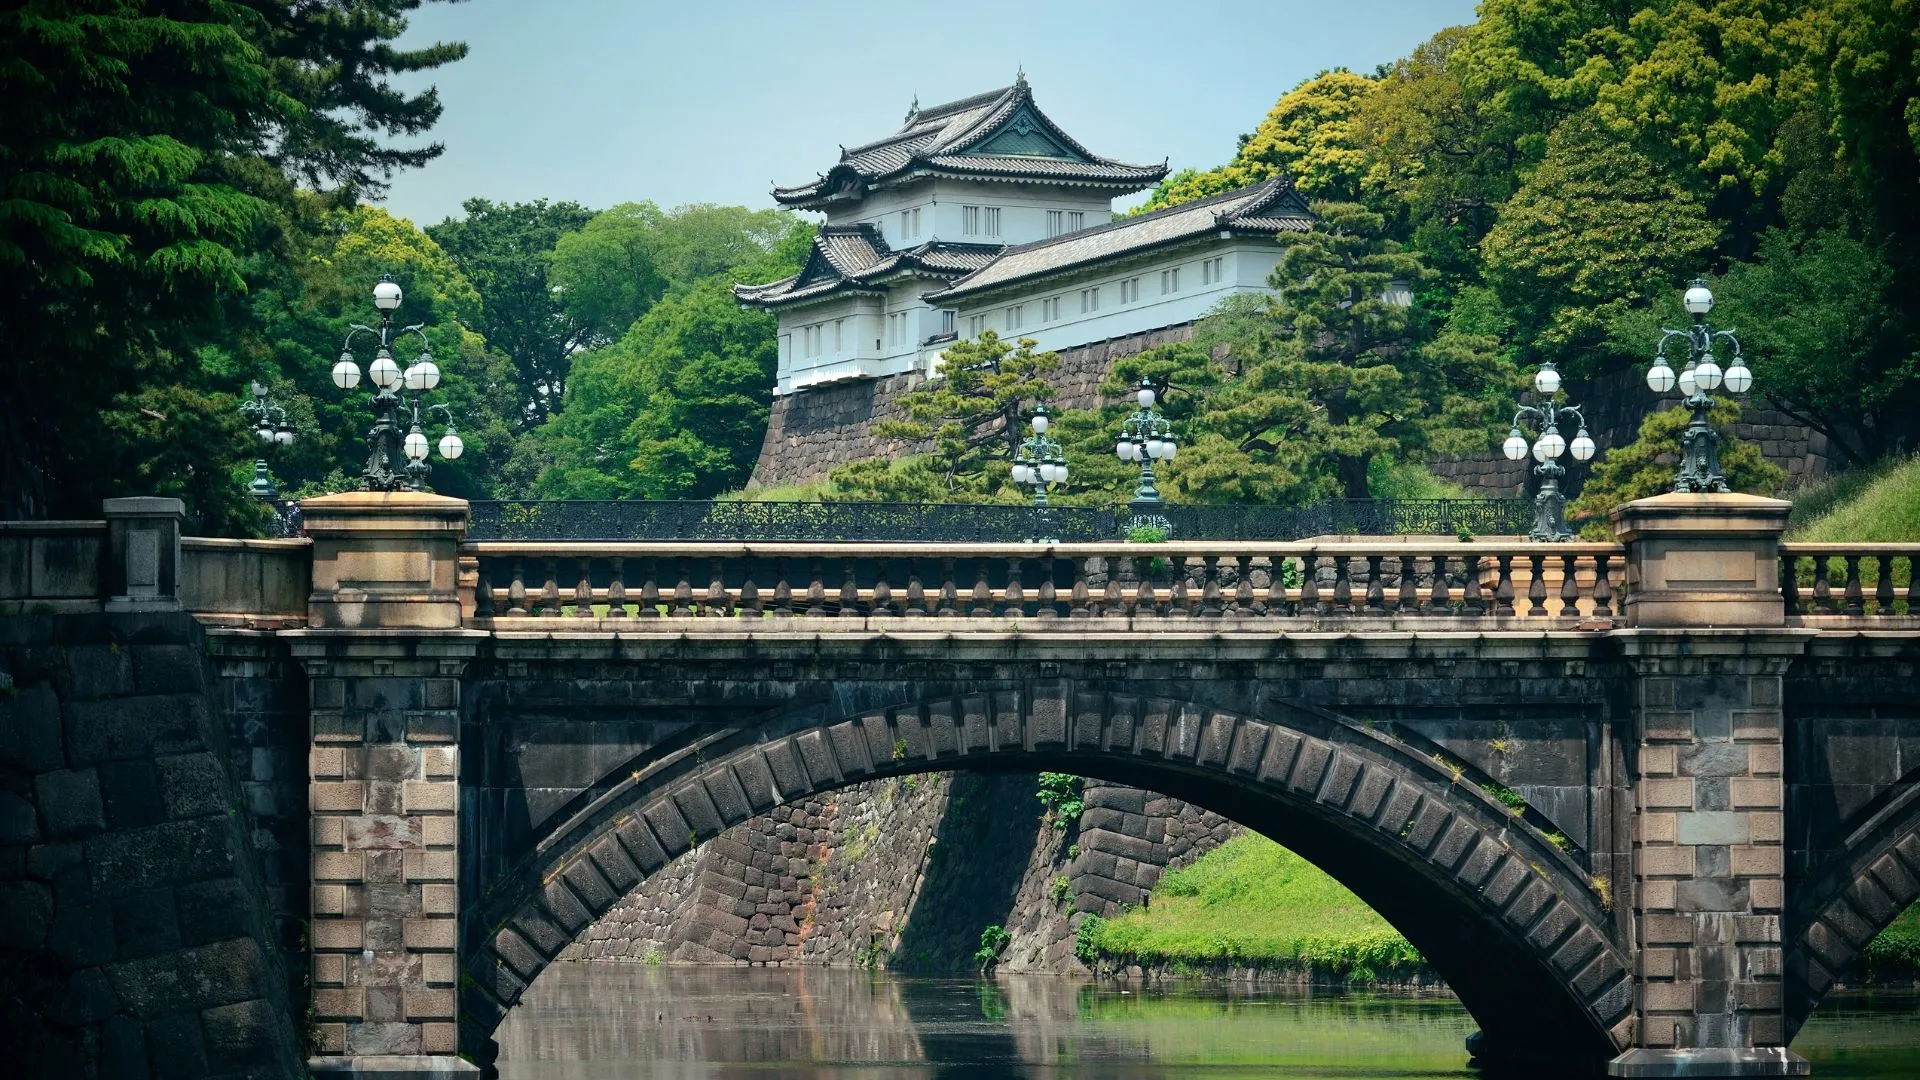 The Tokyo Imperial Castle is on a river bank over looking an old stone bridge